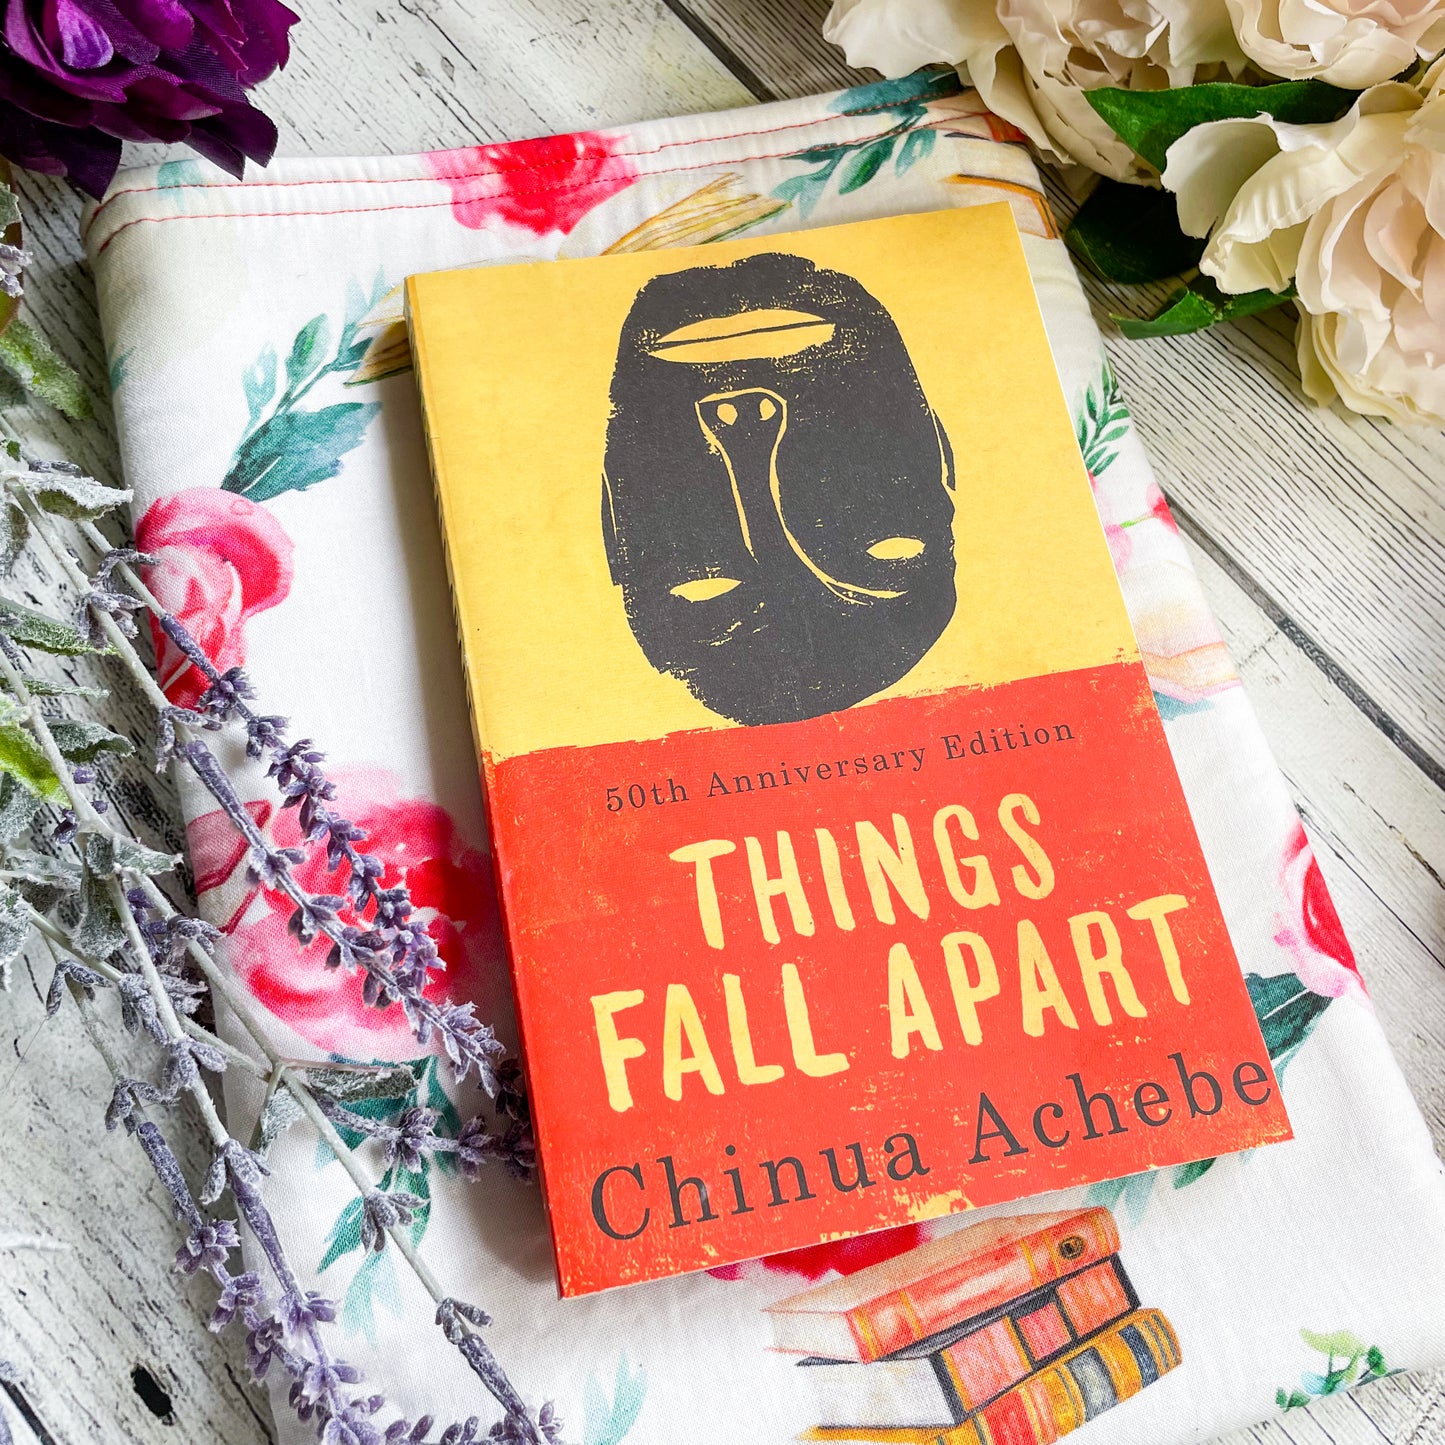 Things Fall Apart by Chinua Achebe (50th Anniversary Edition)